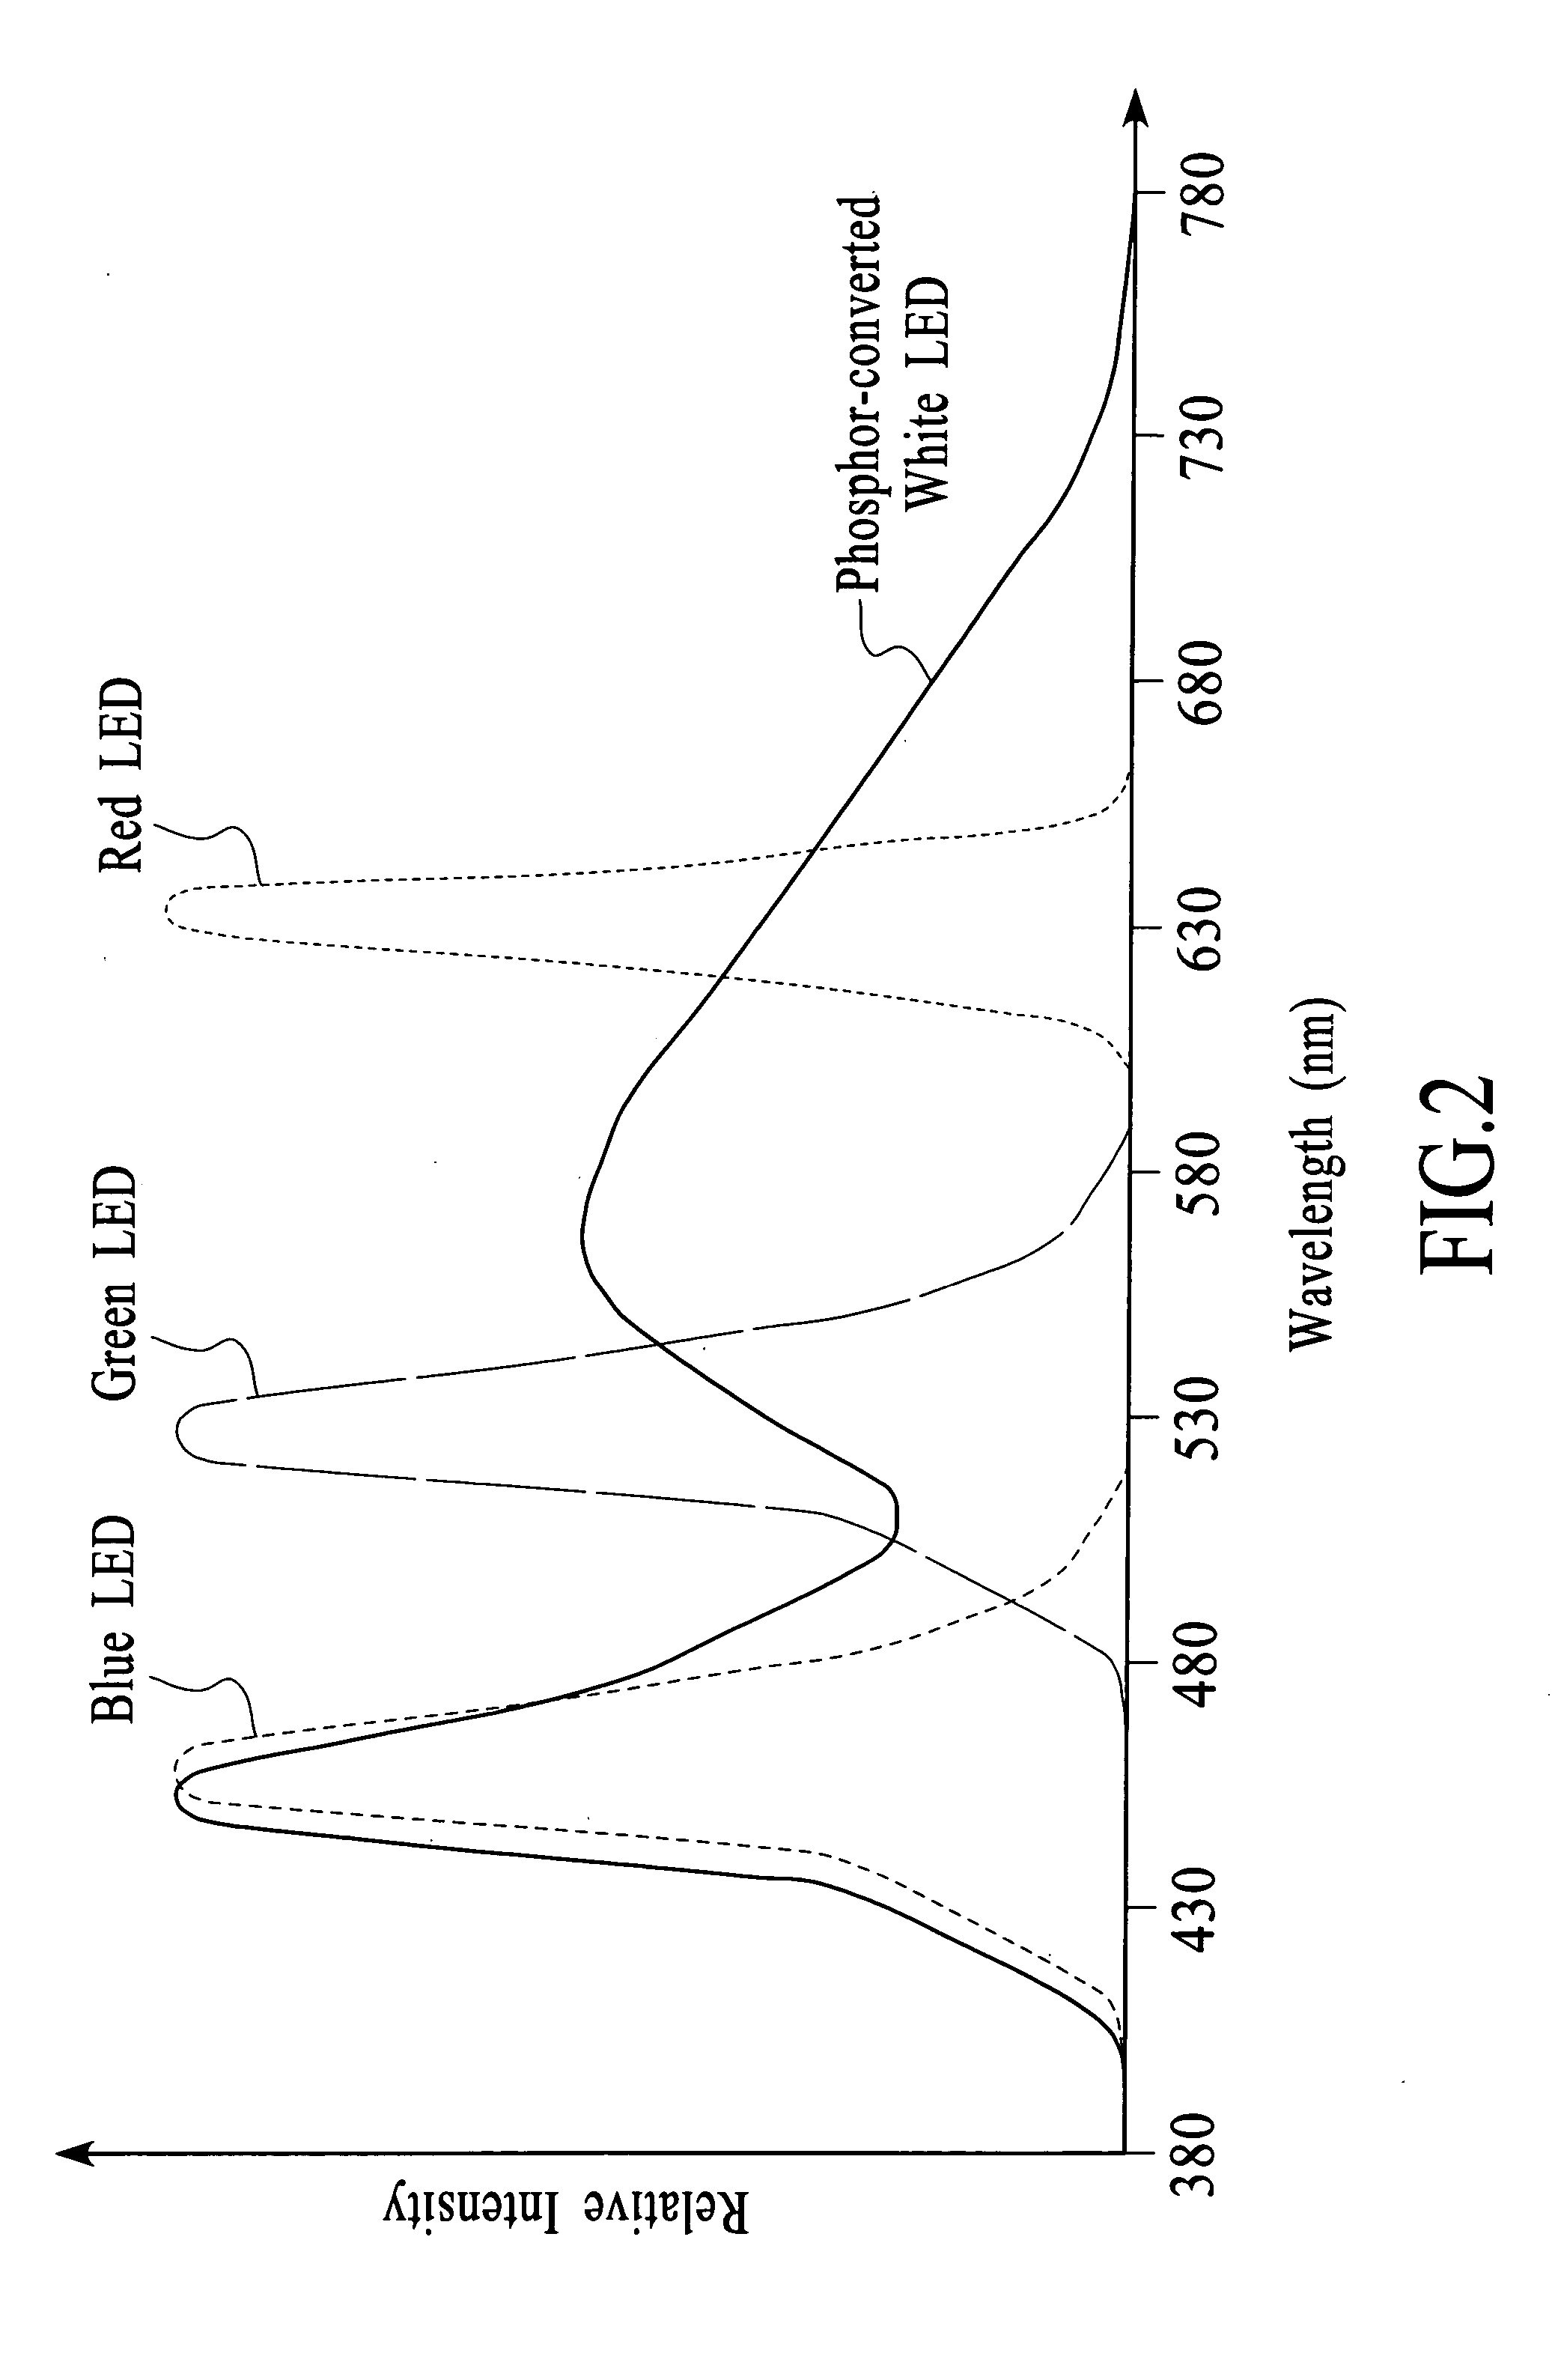 System and method for producing white light using LEDs